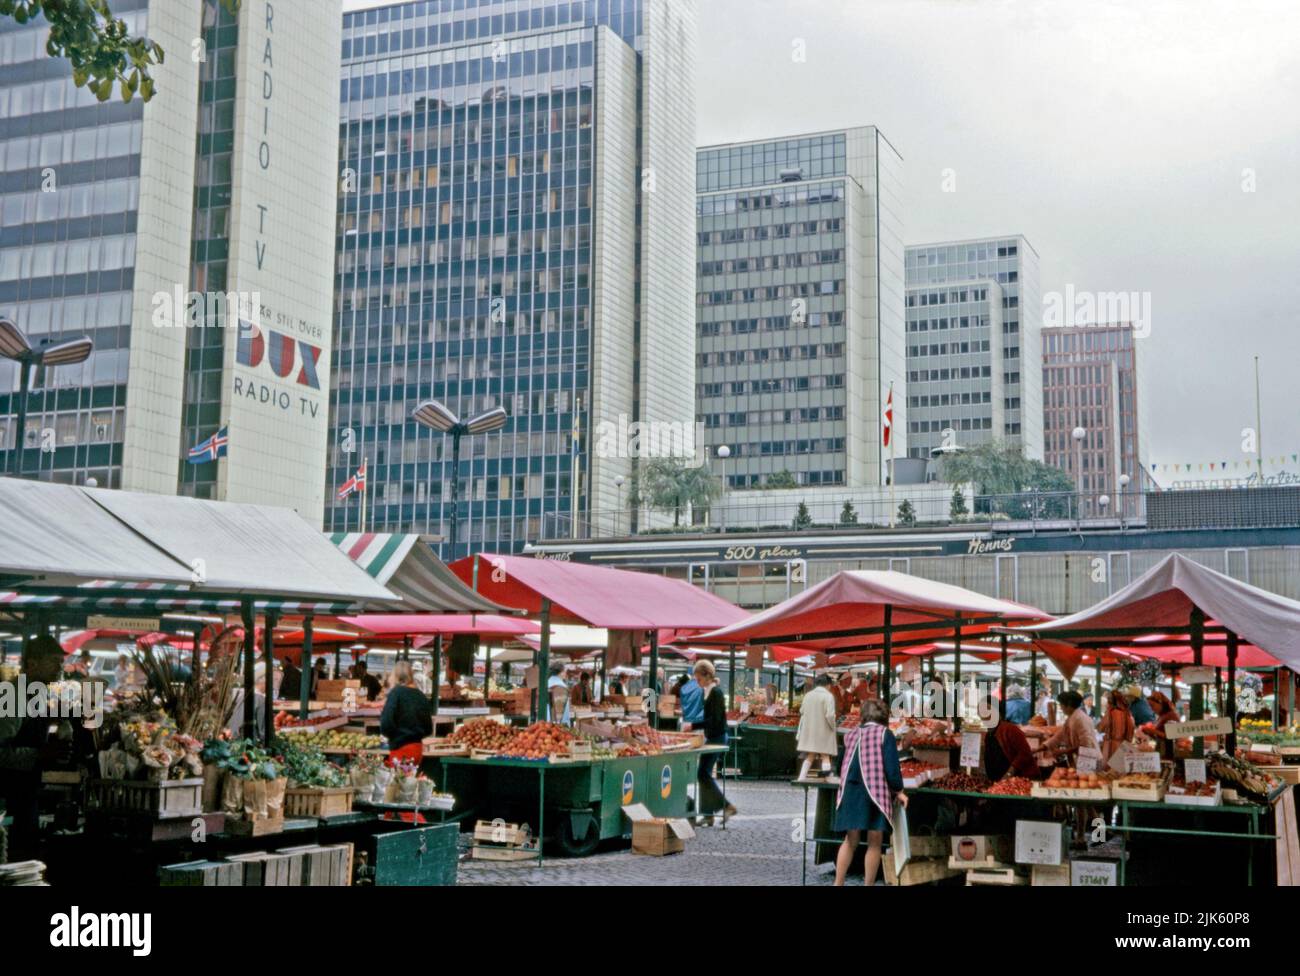 A view of the Hötorget buildings (Hötorgshusen or Hötorgsskraporna) in the central Norrmalm district, Stockholm, Sweden in 1970. In the foreground is the Hötorget torghandel (market) outside the Konserthuset (Consert House). The Hötorget buildings are five modernist high-rise office blocks. The nearest block carries a giant advertising logo for Dux TVs and radios. Norrmalm is at centre of Stockholm. This image is from an amateur 35mm colour transparency – a vintage 1970s photograph. Stock Photo